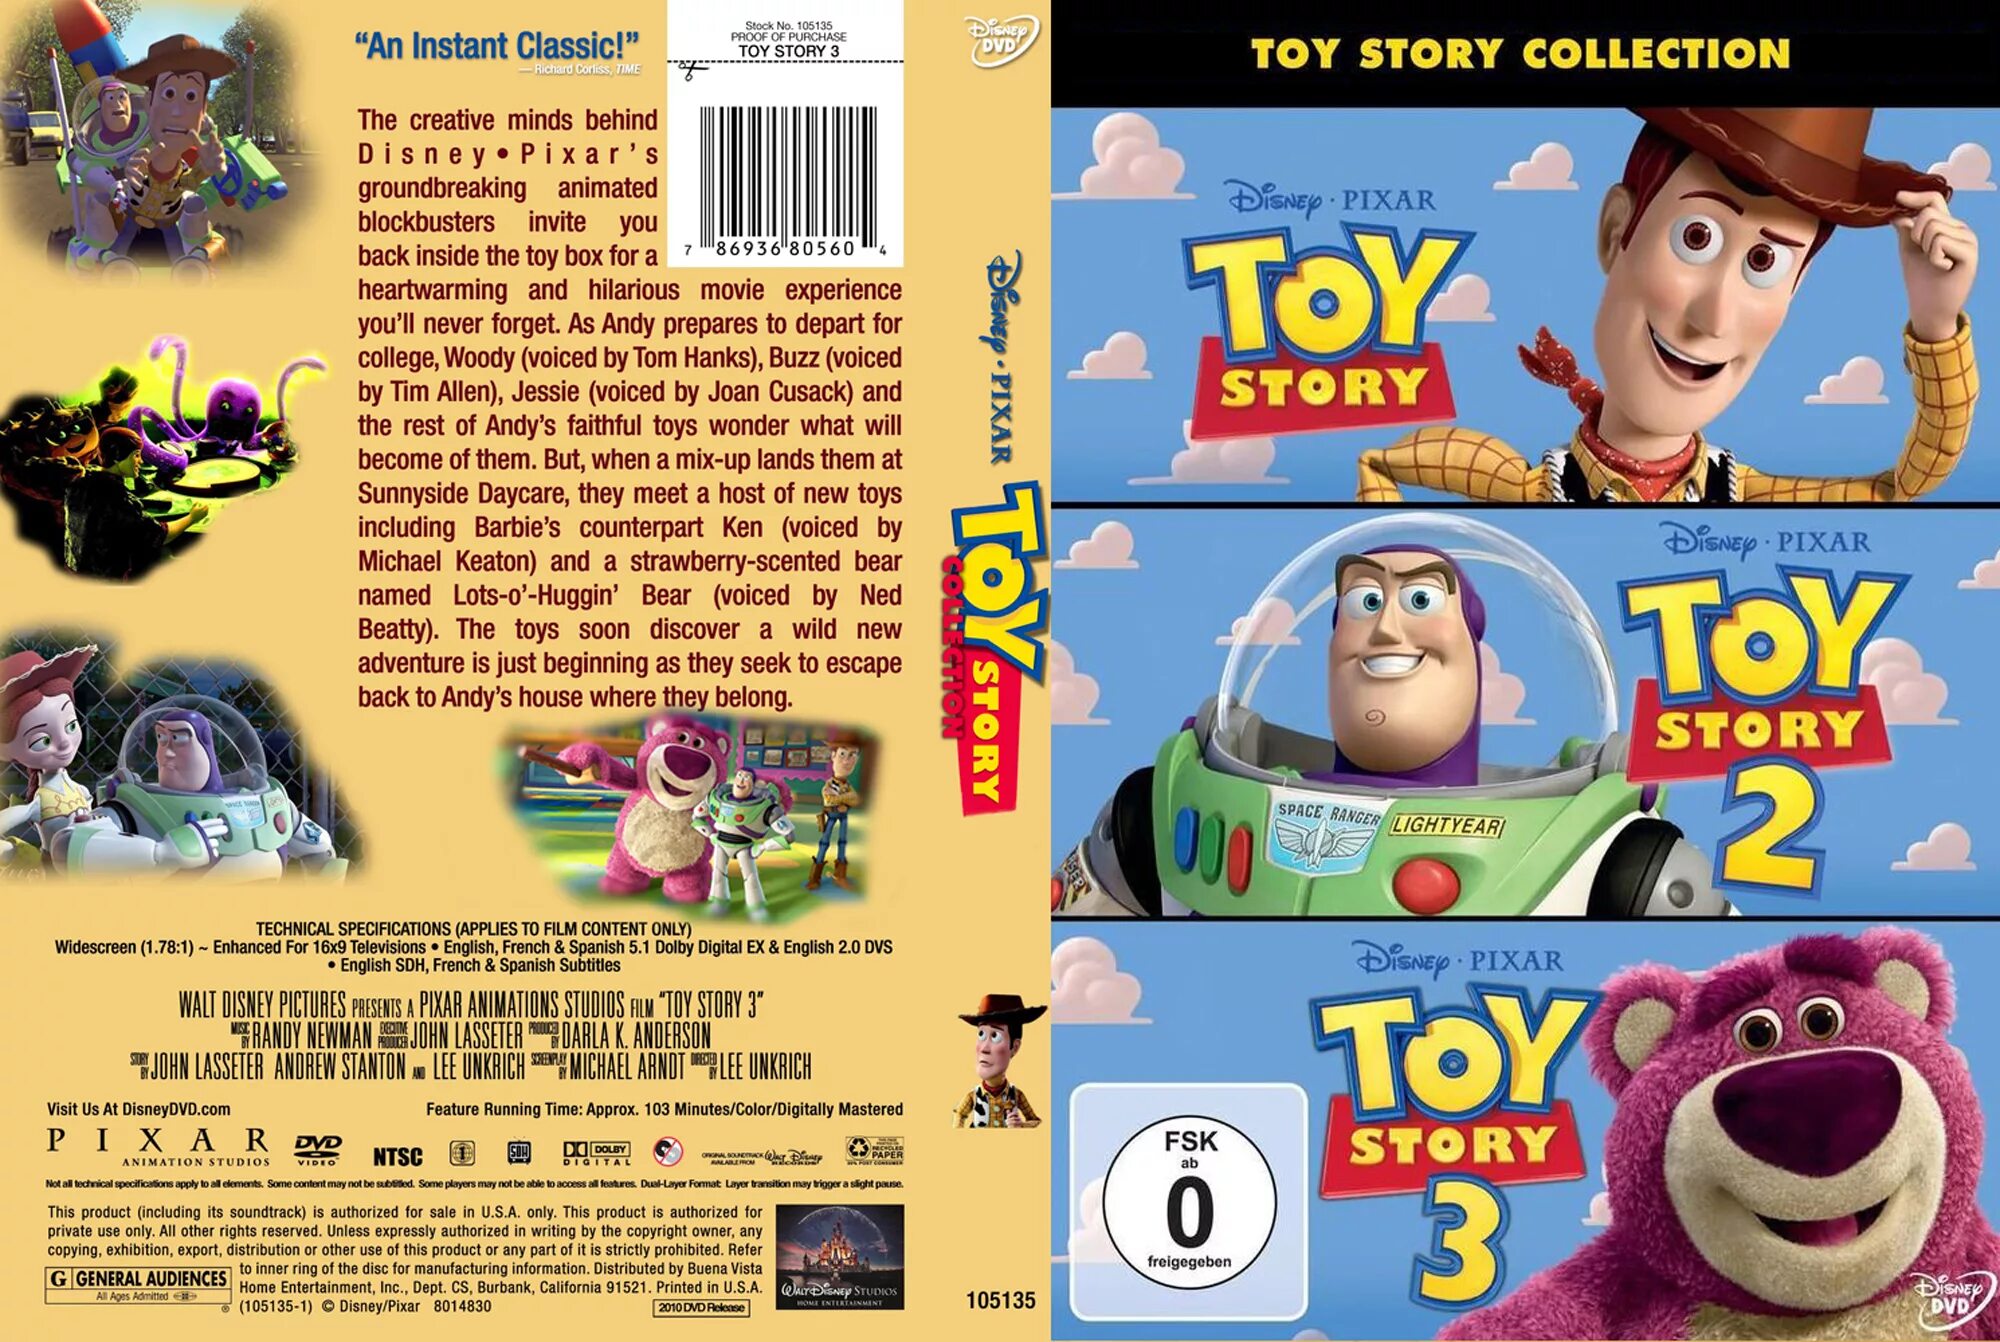 3 in the toy box. Toy story collection. DVD сборник история игрушек. Видеокассета история игрушек. История игрушек трилогия.